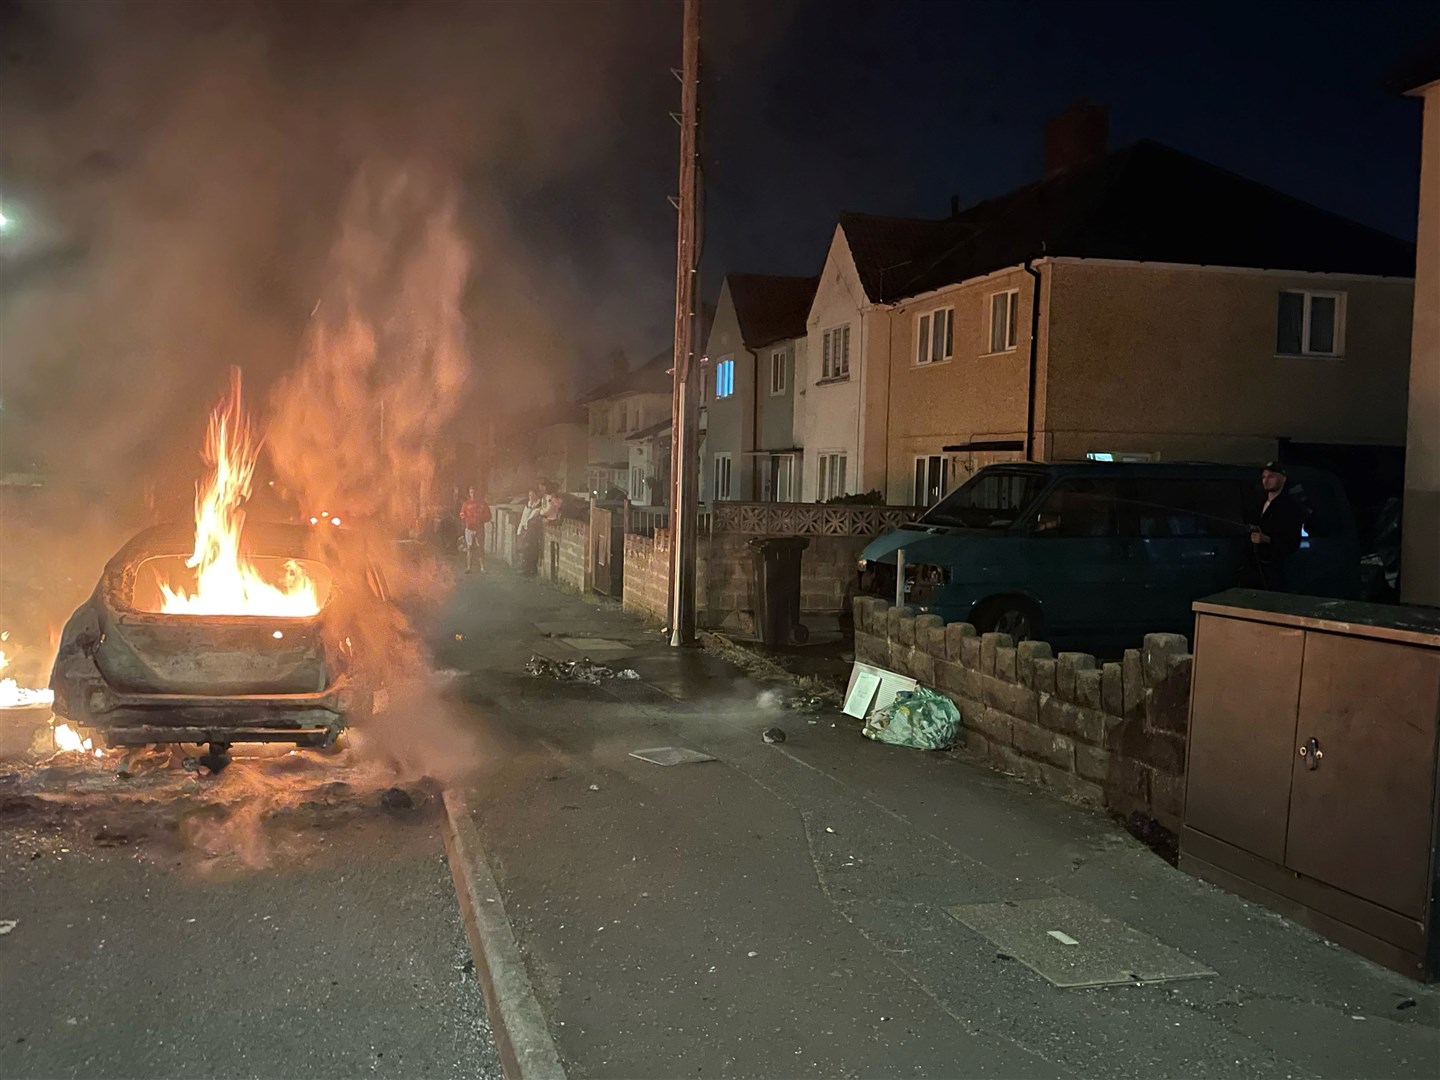 Tensions between locals and police at the scene led to a riot lasting several hours (Bronwen Weatherby/PA)